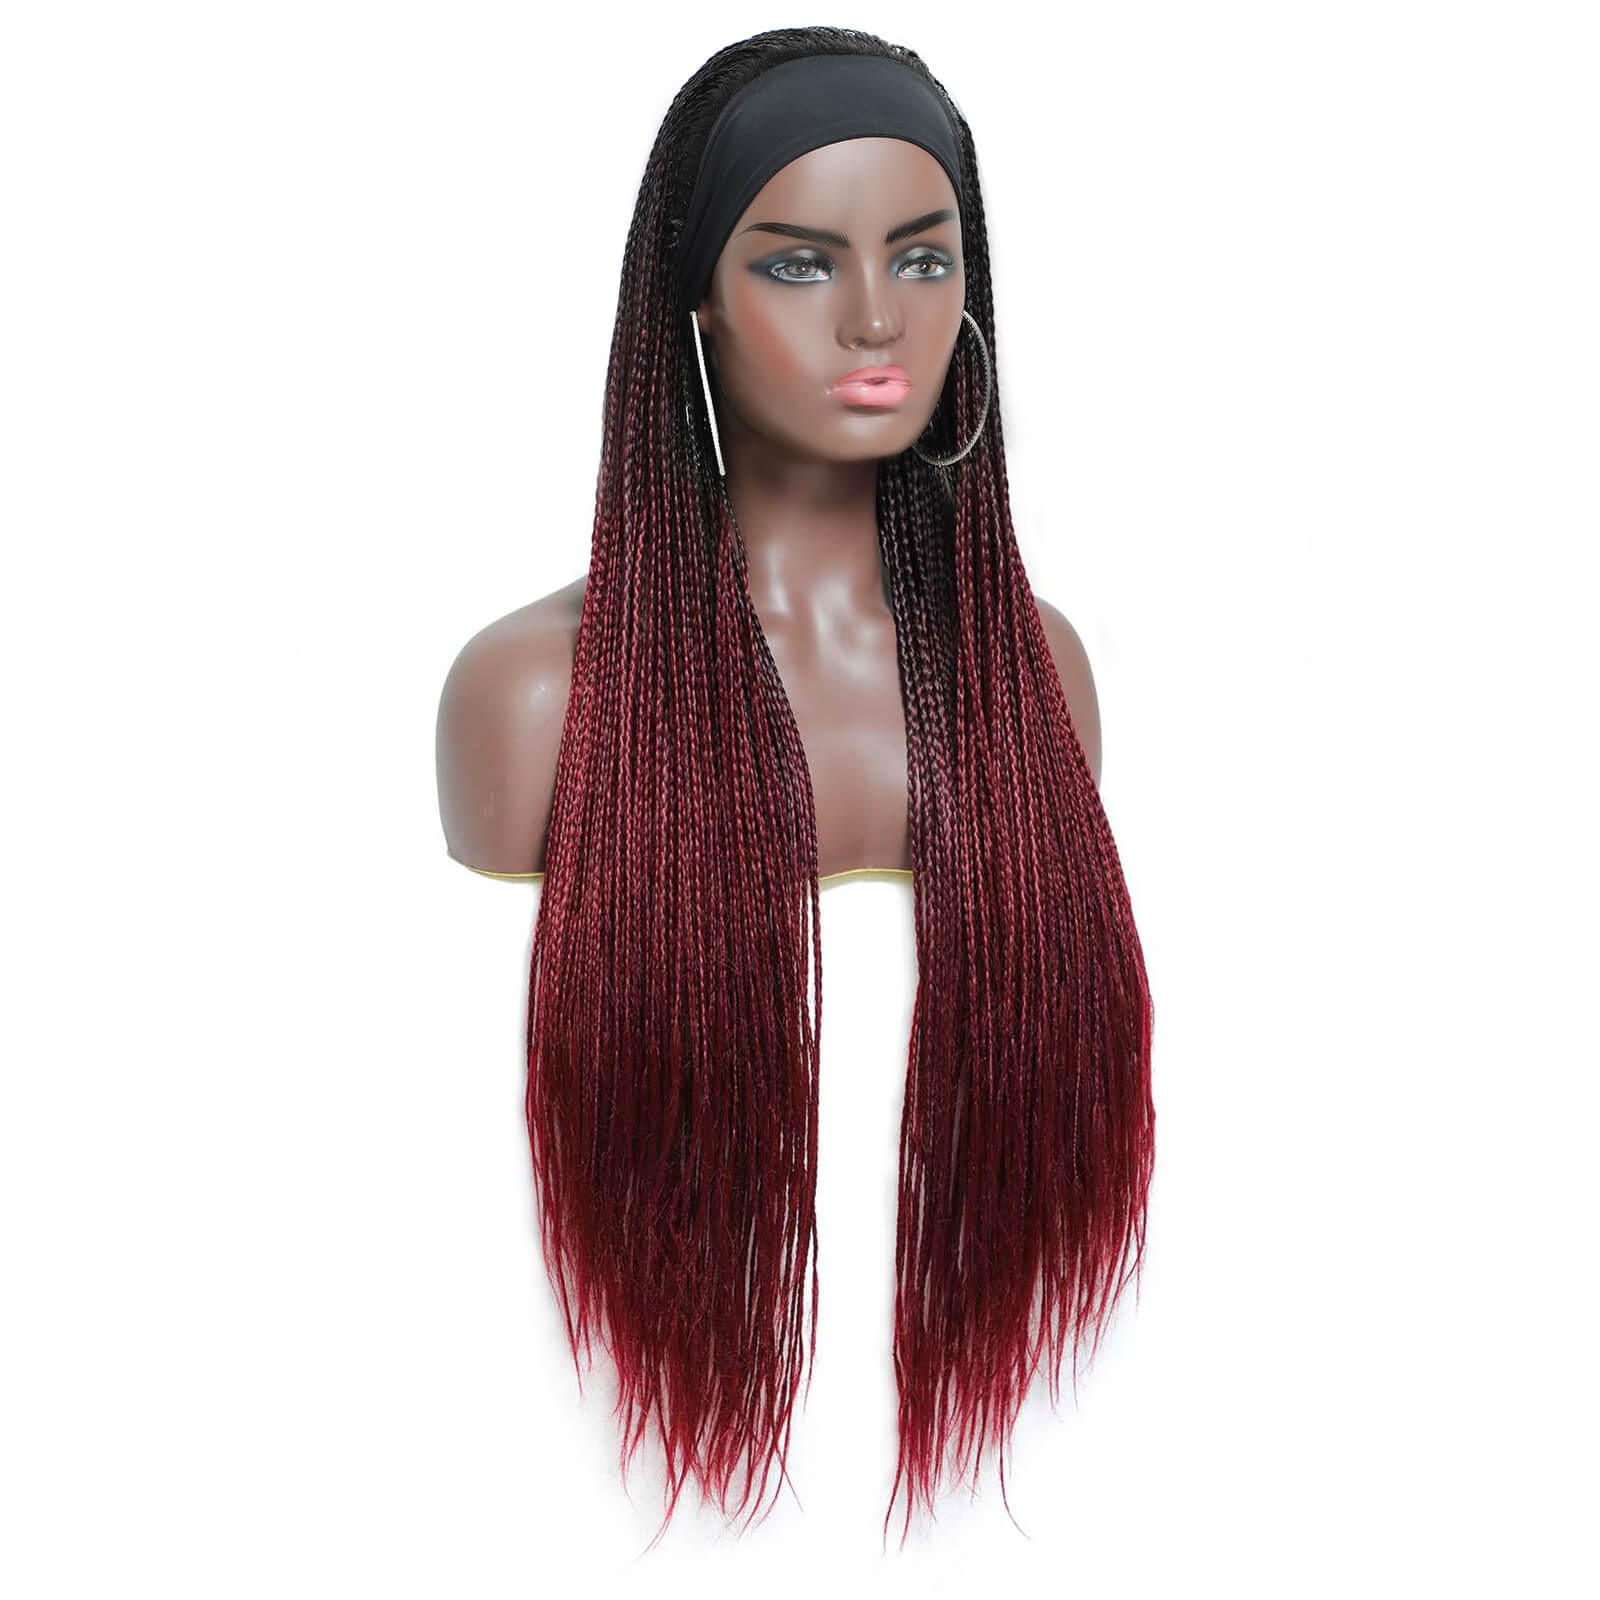 High Quality Long Box Braid Wig Braiding Synthetic Lace Front Wig Black  Burgundy Red Color Cornrow Braids Lace Wigs For Black Wome225m From Ch9807,  $22.53